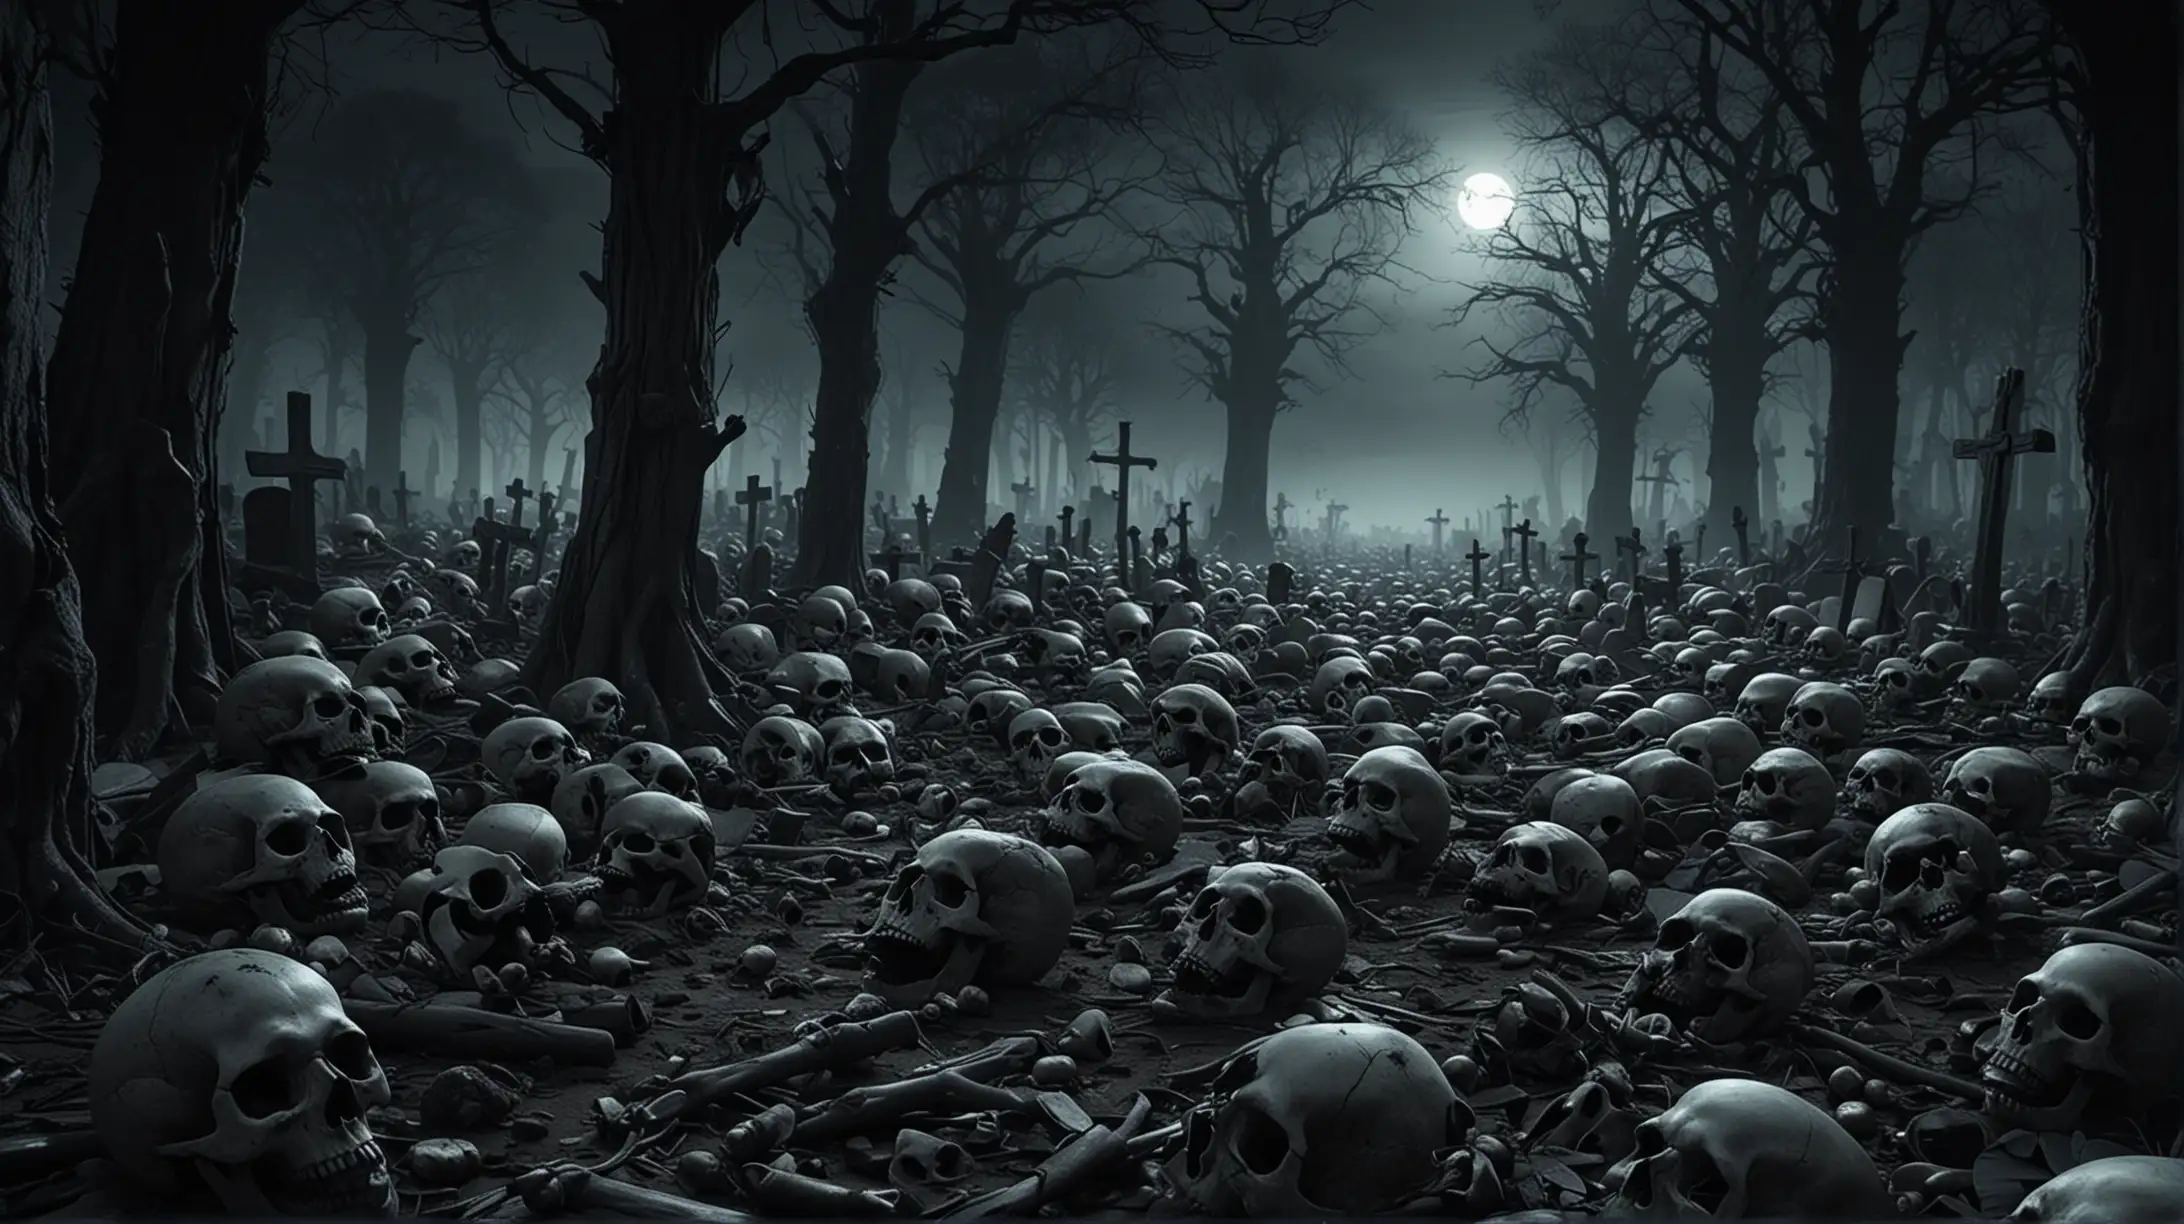 Eerie Skull Cemetery Haunting Dark Landscape with 4K Quality Clarity